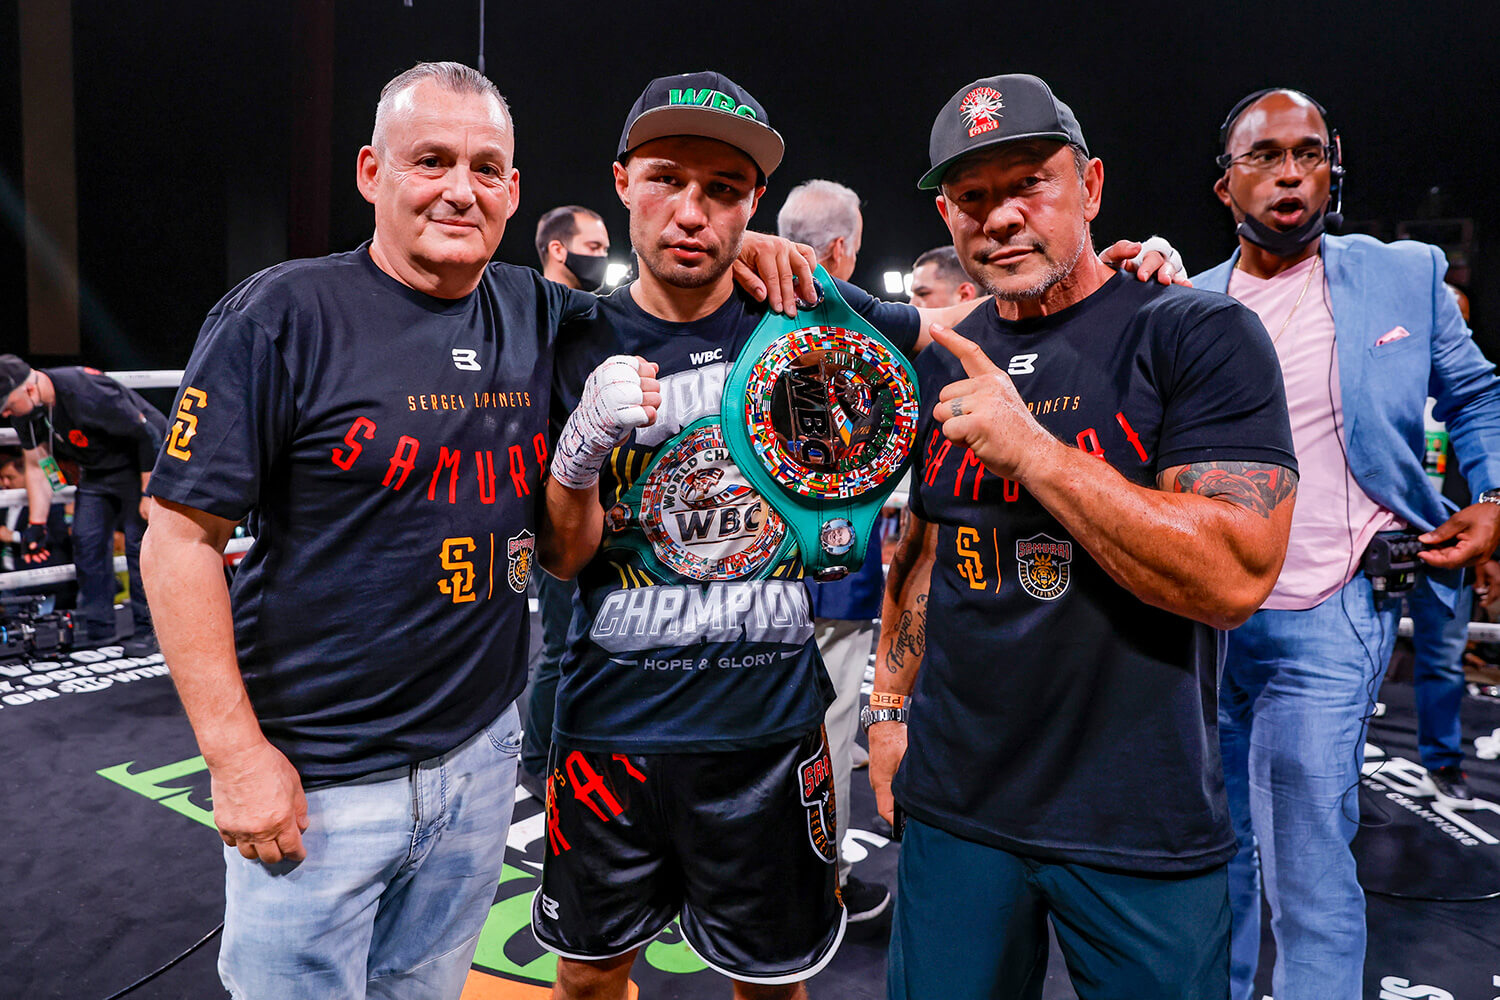 FORMER CHAMPION SERGEY LIPINETS DROPS, DOMINATES OMAR FIGUEROA JR. IN SHOWTIME® MAIN EVENT AT SEMINOLE HARD ROCK HOTEL & CASINO IN HOLLYWOOD, FLA. HEADLINING PREMIER BOXING CHAMPIONS EVENT